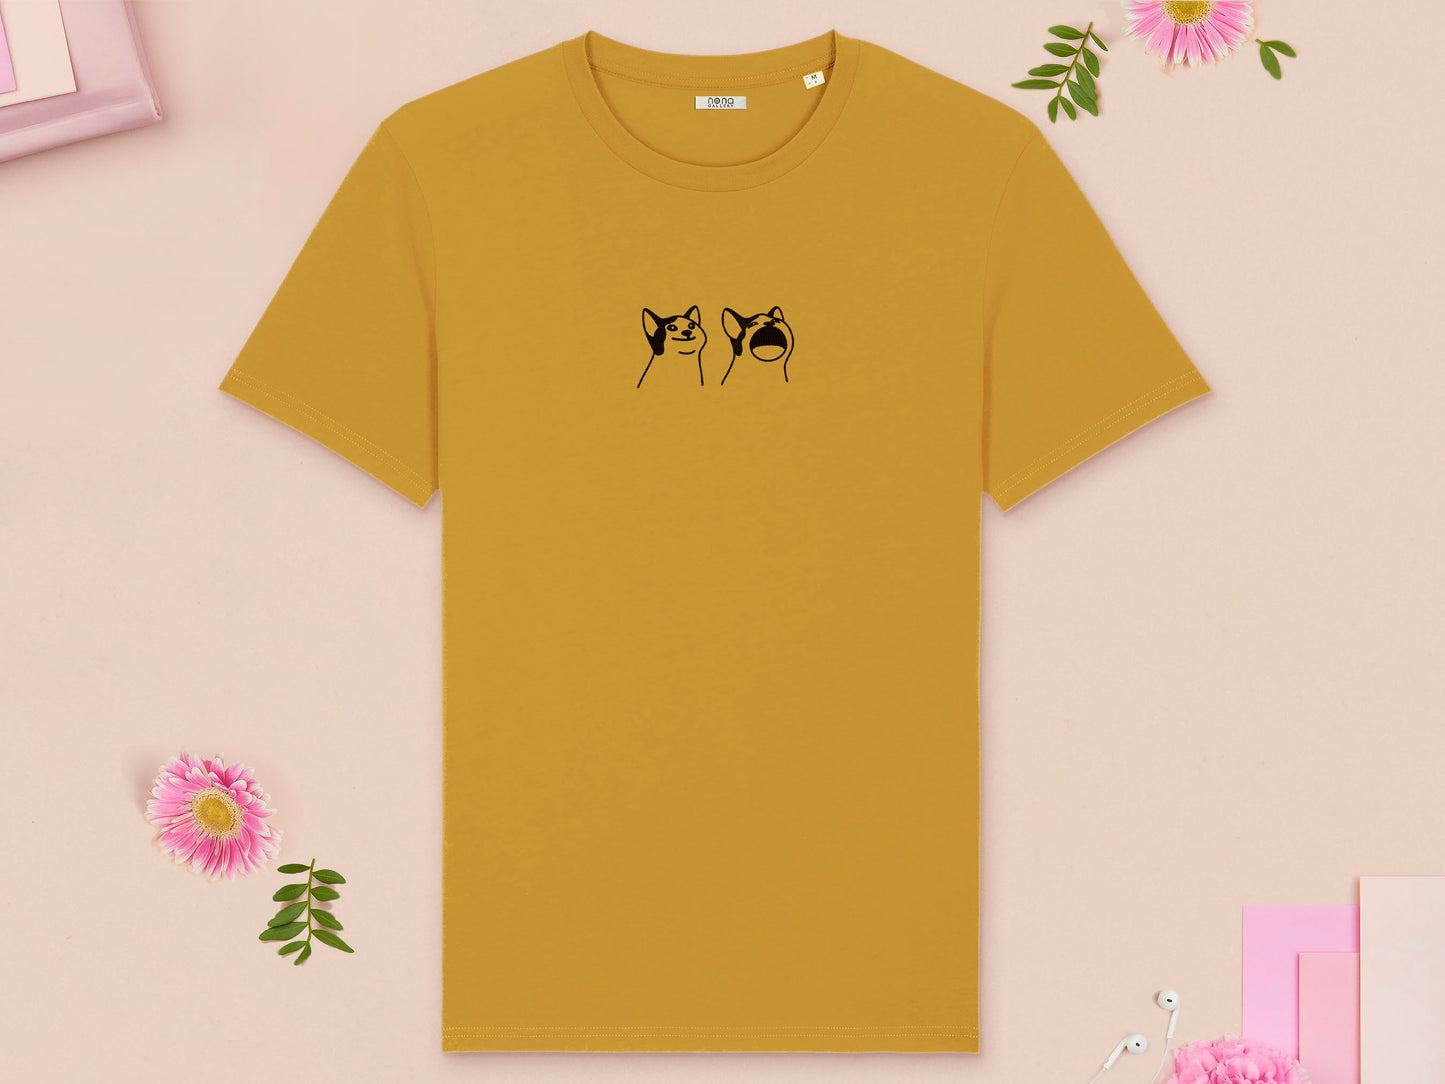 A yellow crew neck short sleeve t-shirt, with an embroidered black thread design of a cute popcat the cat meme reaction twitch emote